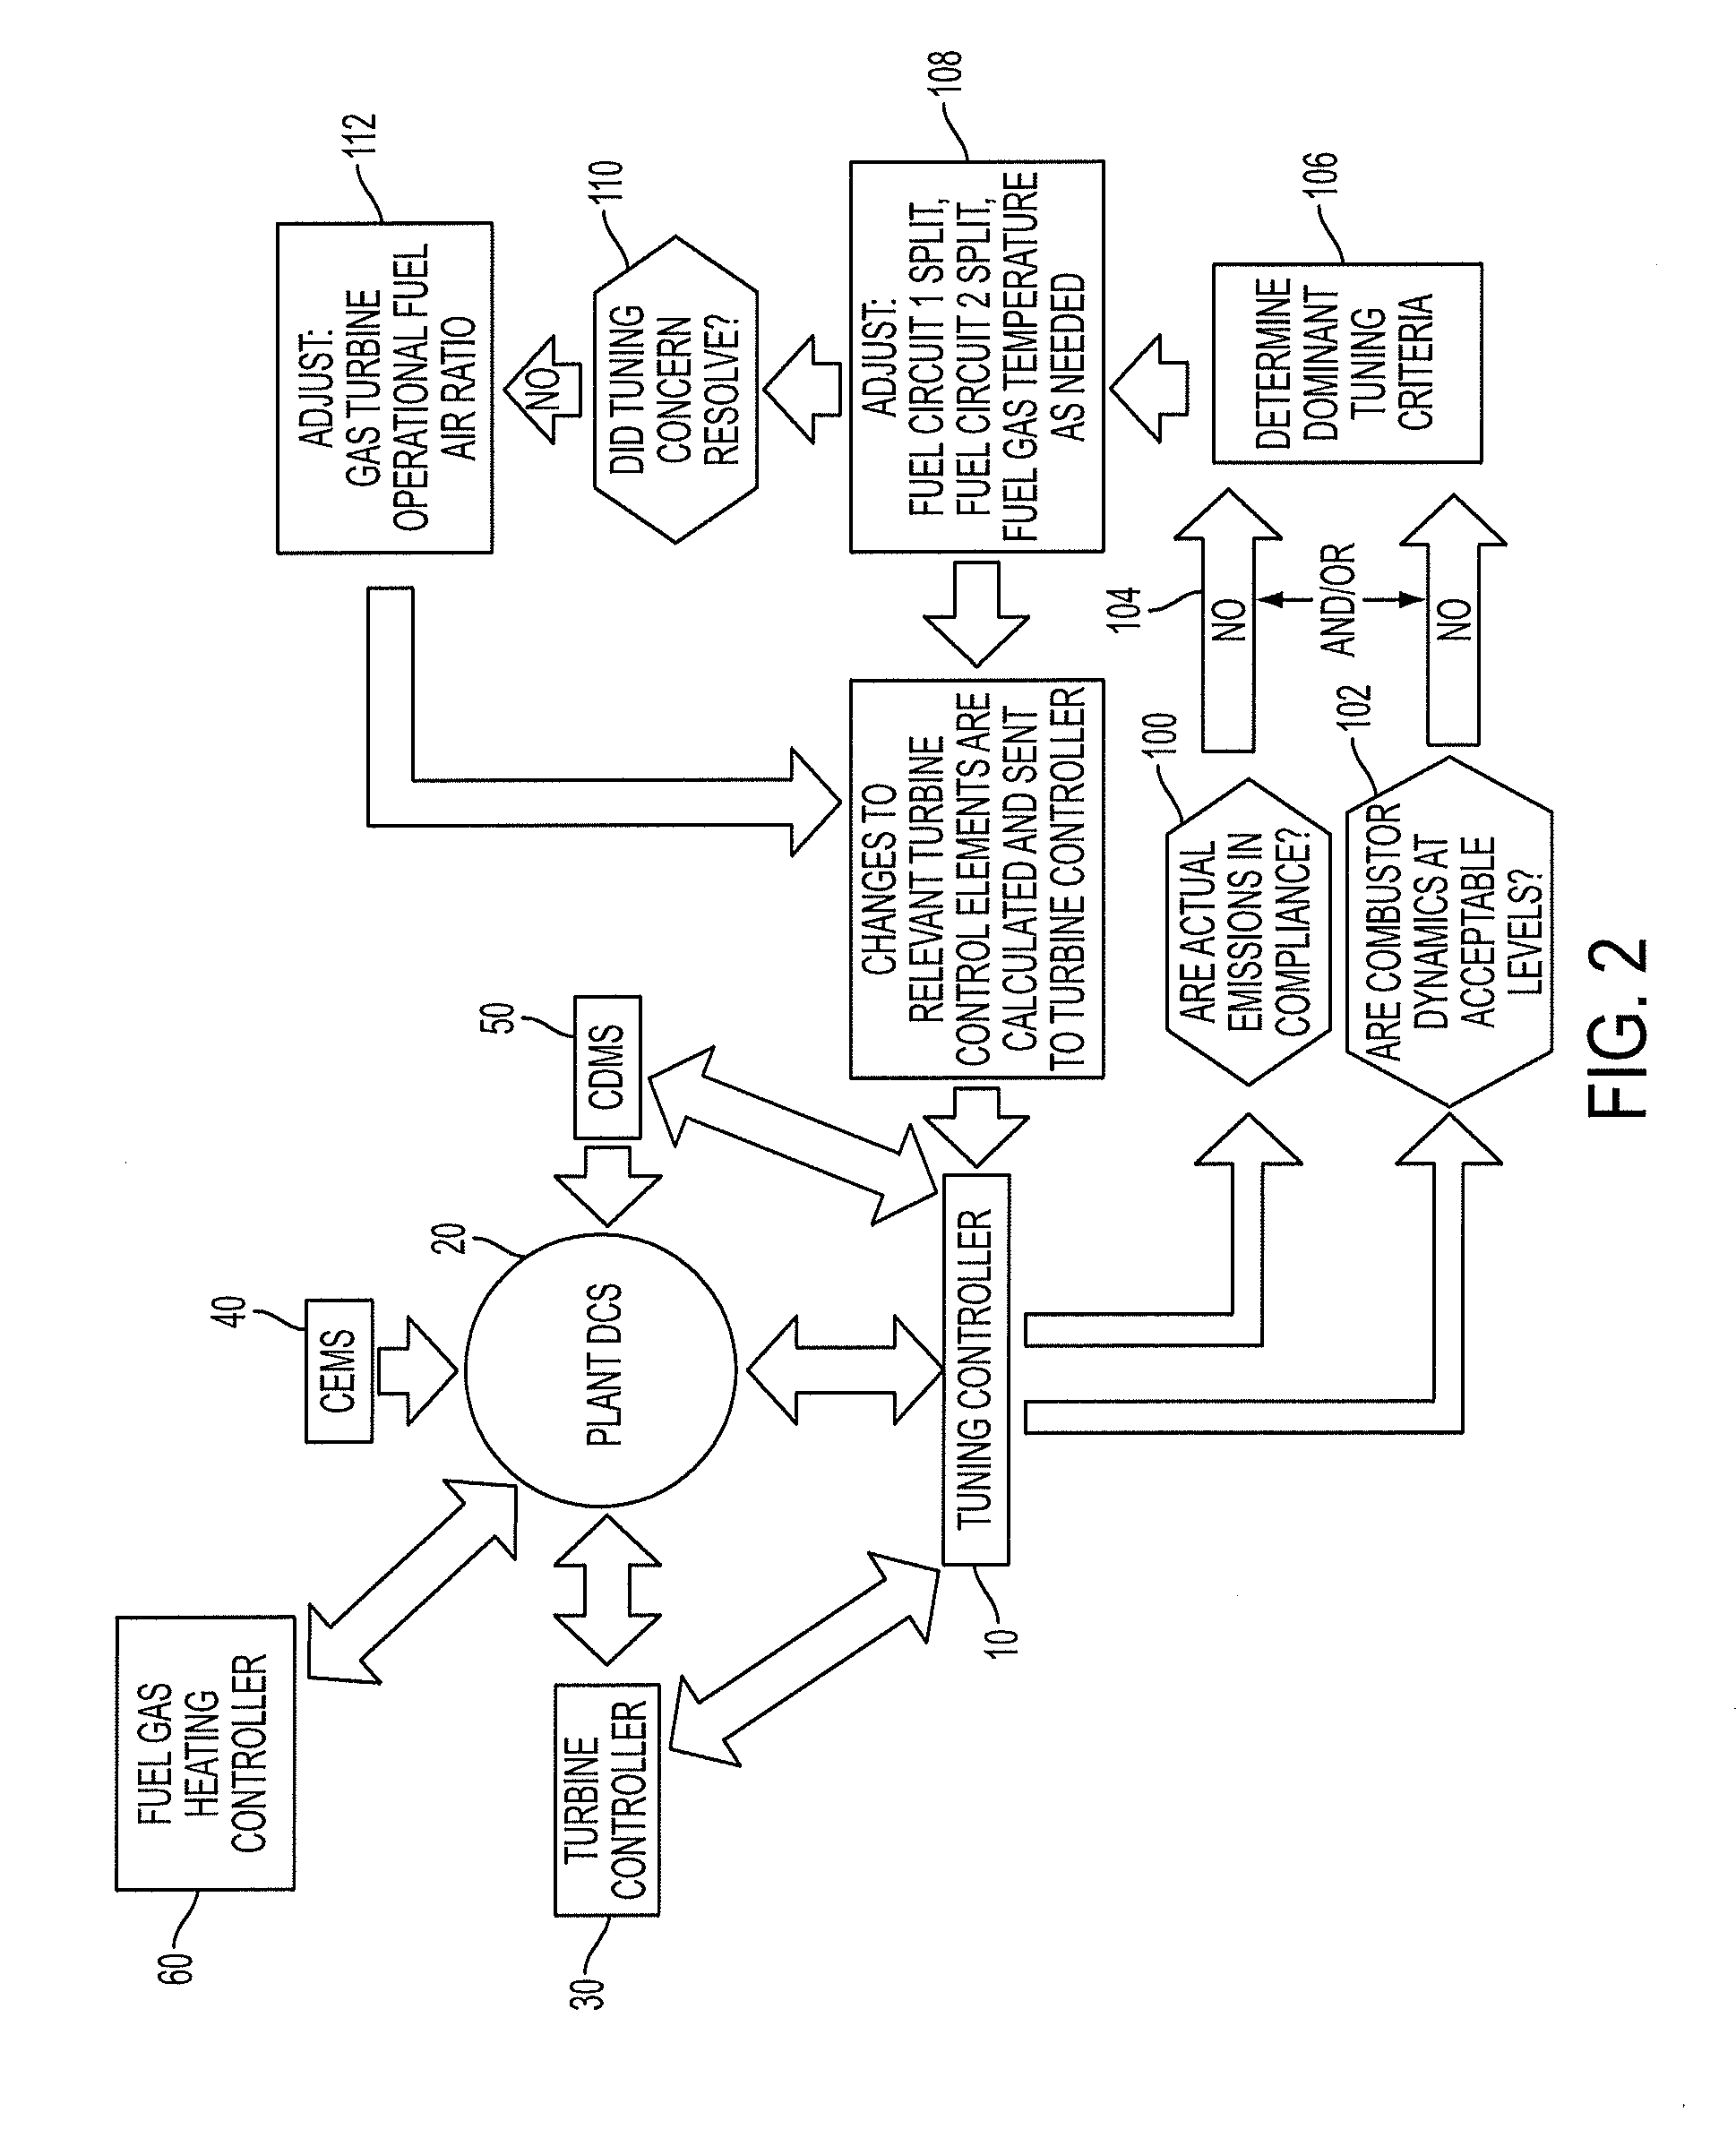 Automated tuning of gas turbine combustion systems